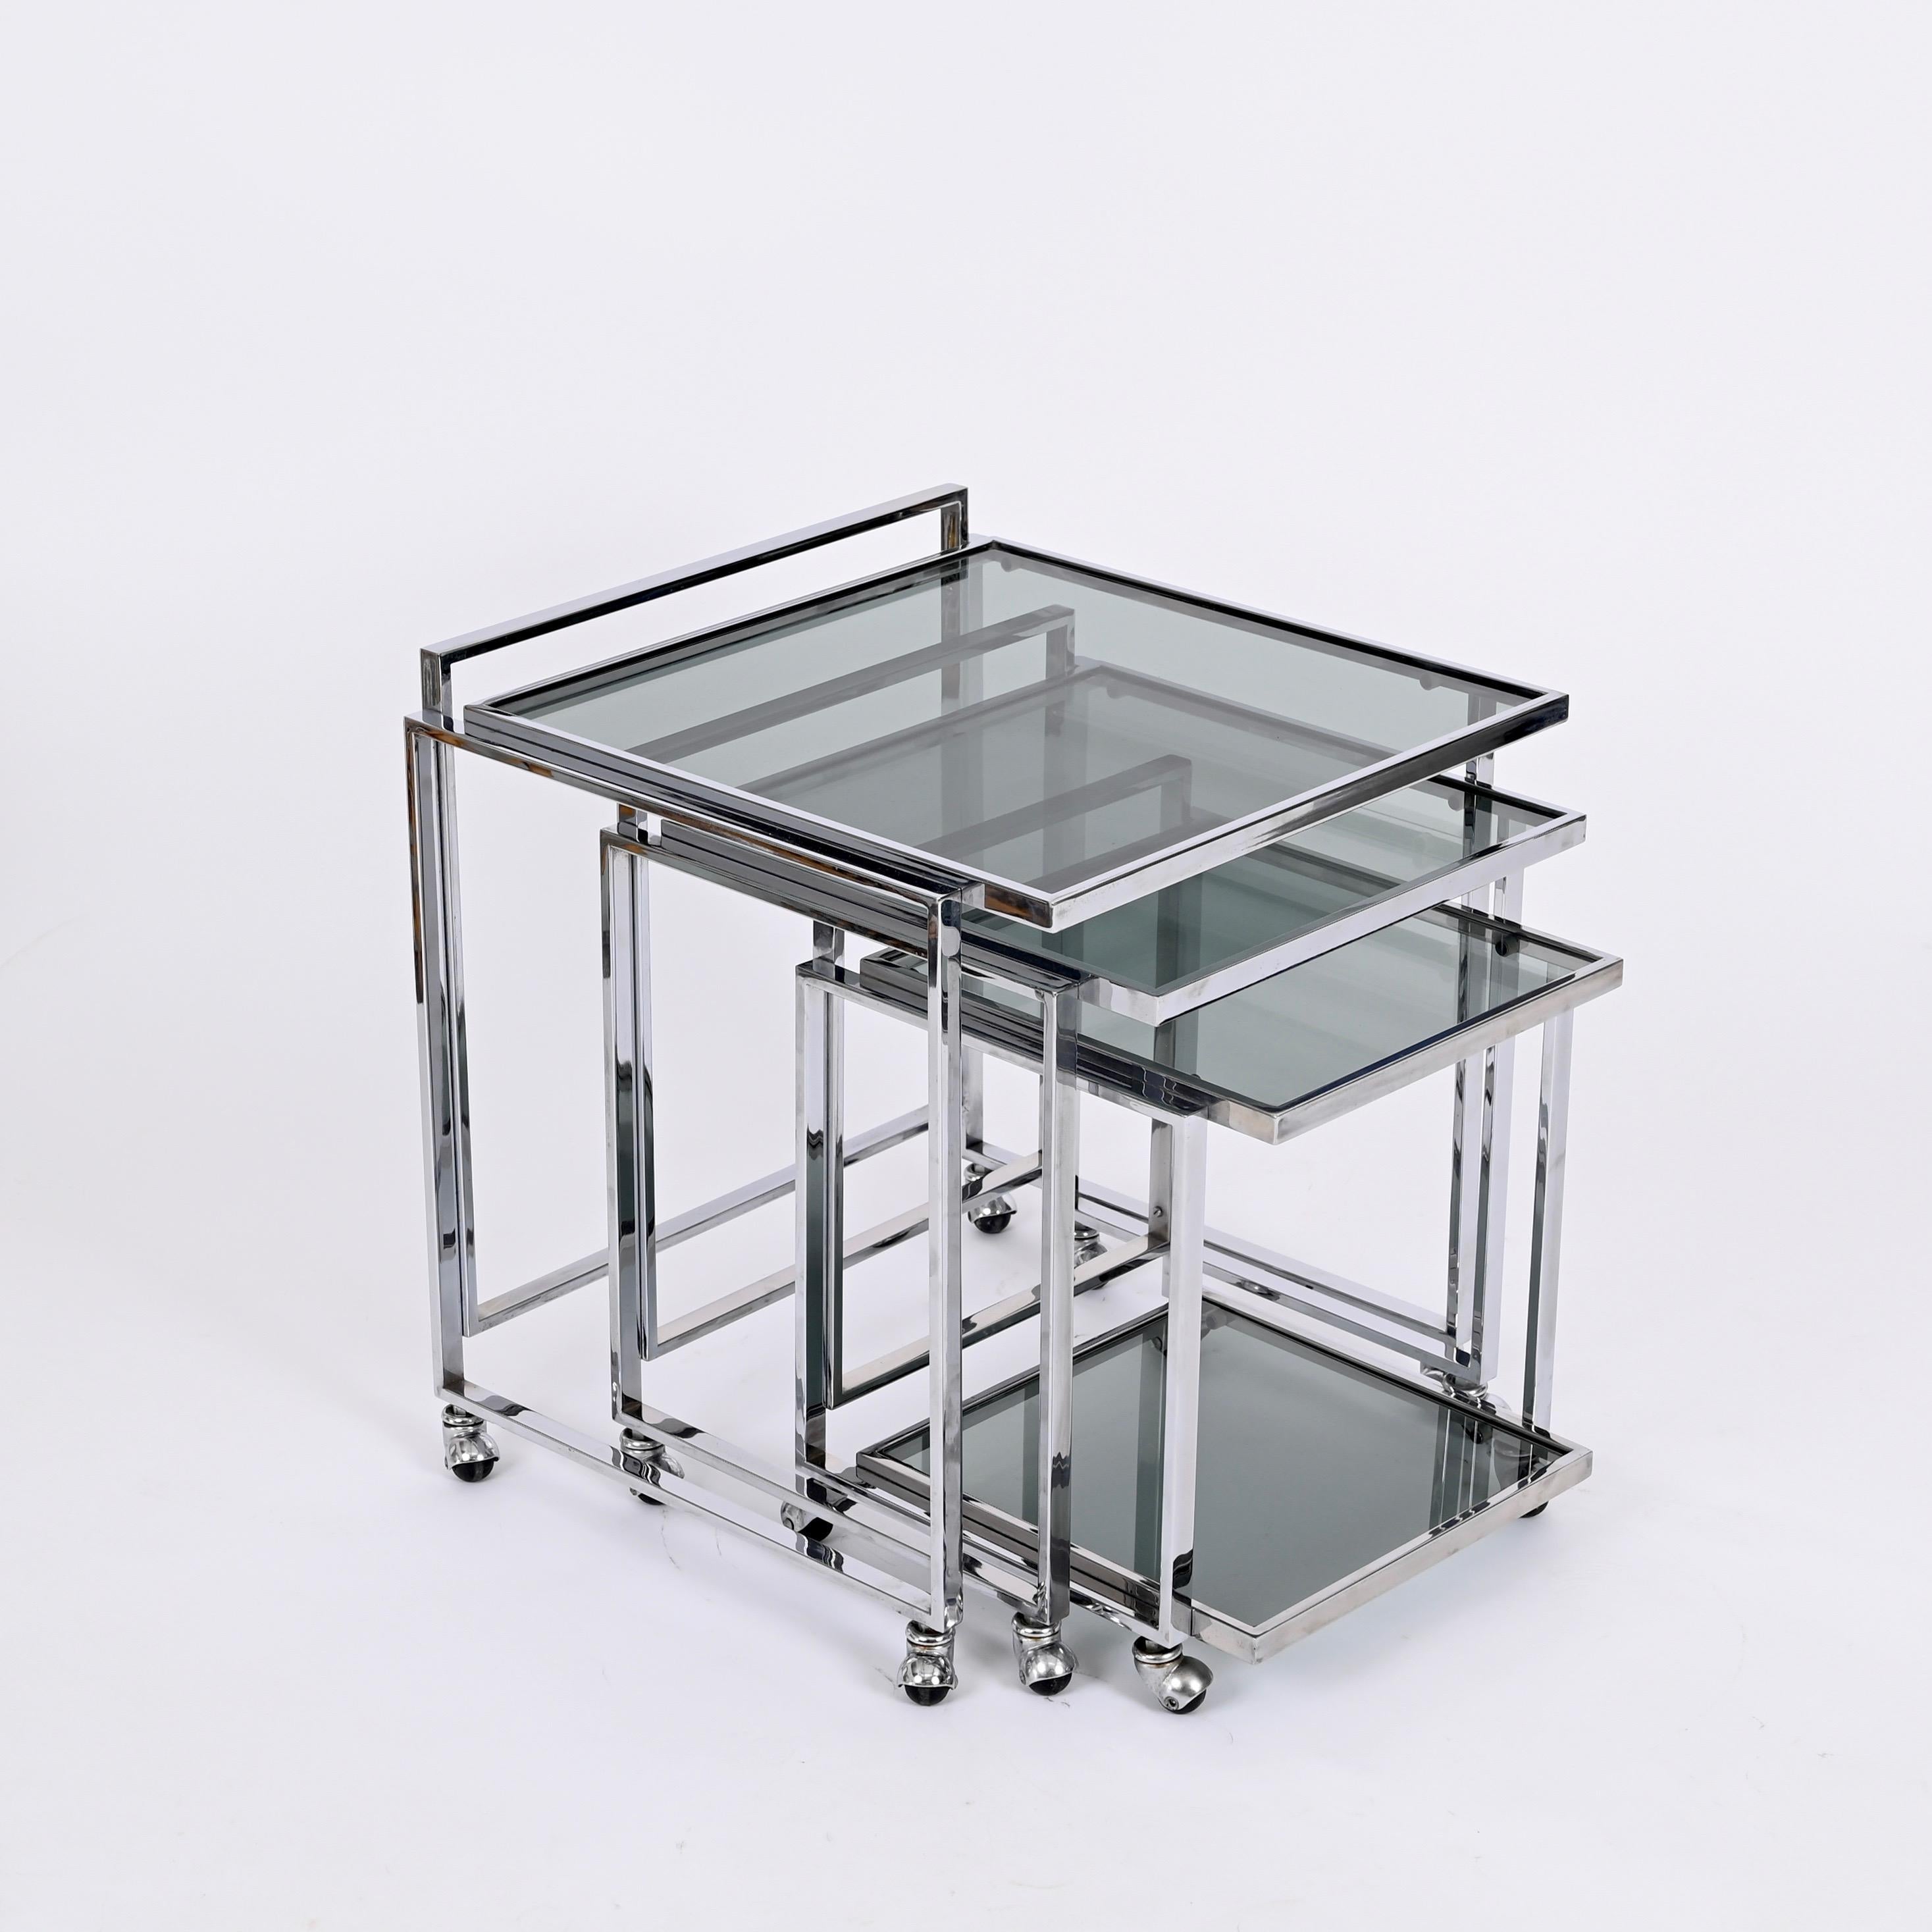 Stunning set of three nesting tables with wheels fully made in chromed steel with smoked glass top. This stylish nesting tables were made in Italy during thje 1970s.

These three versatile nesting tables feature a square shaped structure in chrom